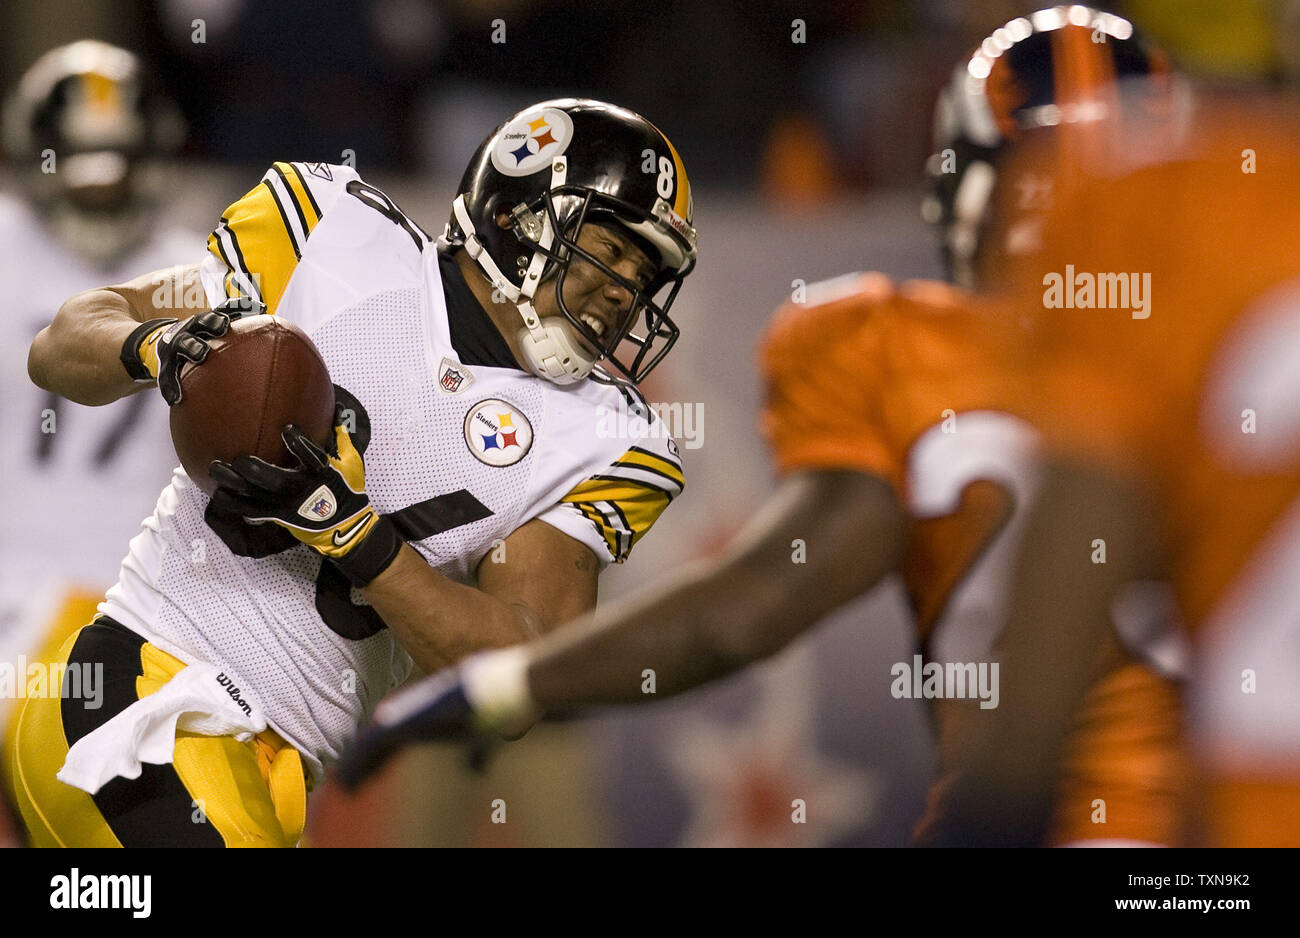 Pittsburgh Steelers split end Hines Ward scores the eventual game-winning touchdown on a three-yard pass against the Denver Broncos during the third quarter at Invesco Field at Mile High in Denver on November 9, 2009.   Pittsburgh (6-2) beat Denver  (6-2) 28-10.    UPI/Gary C. Caskey... Stock Photo